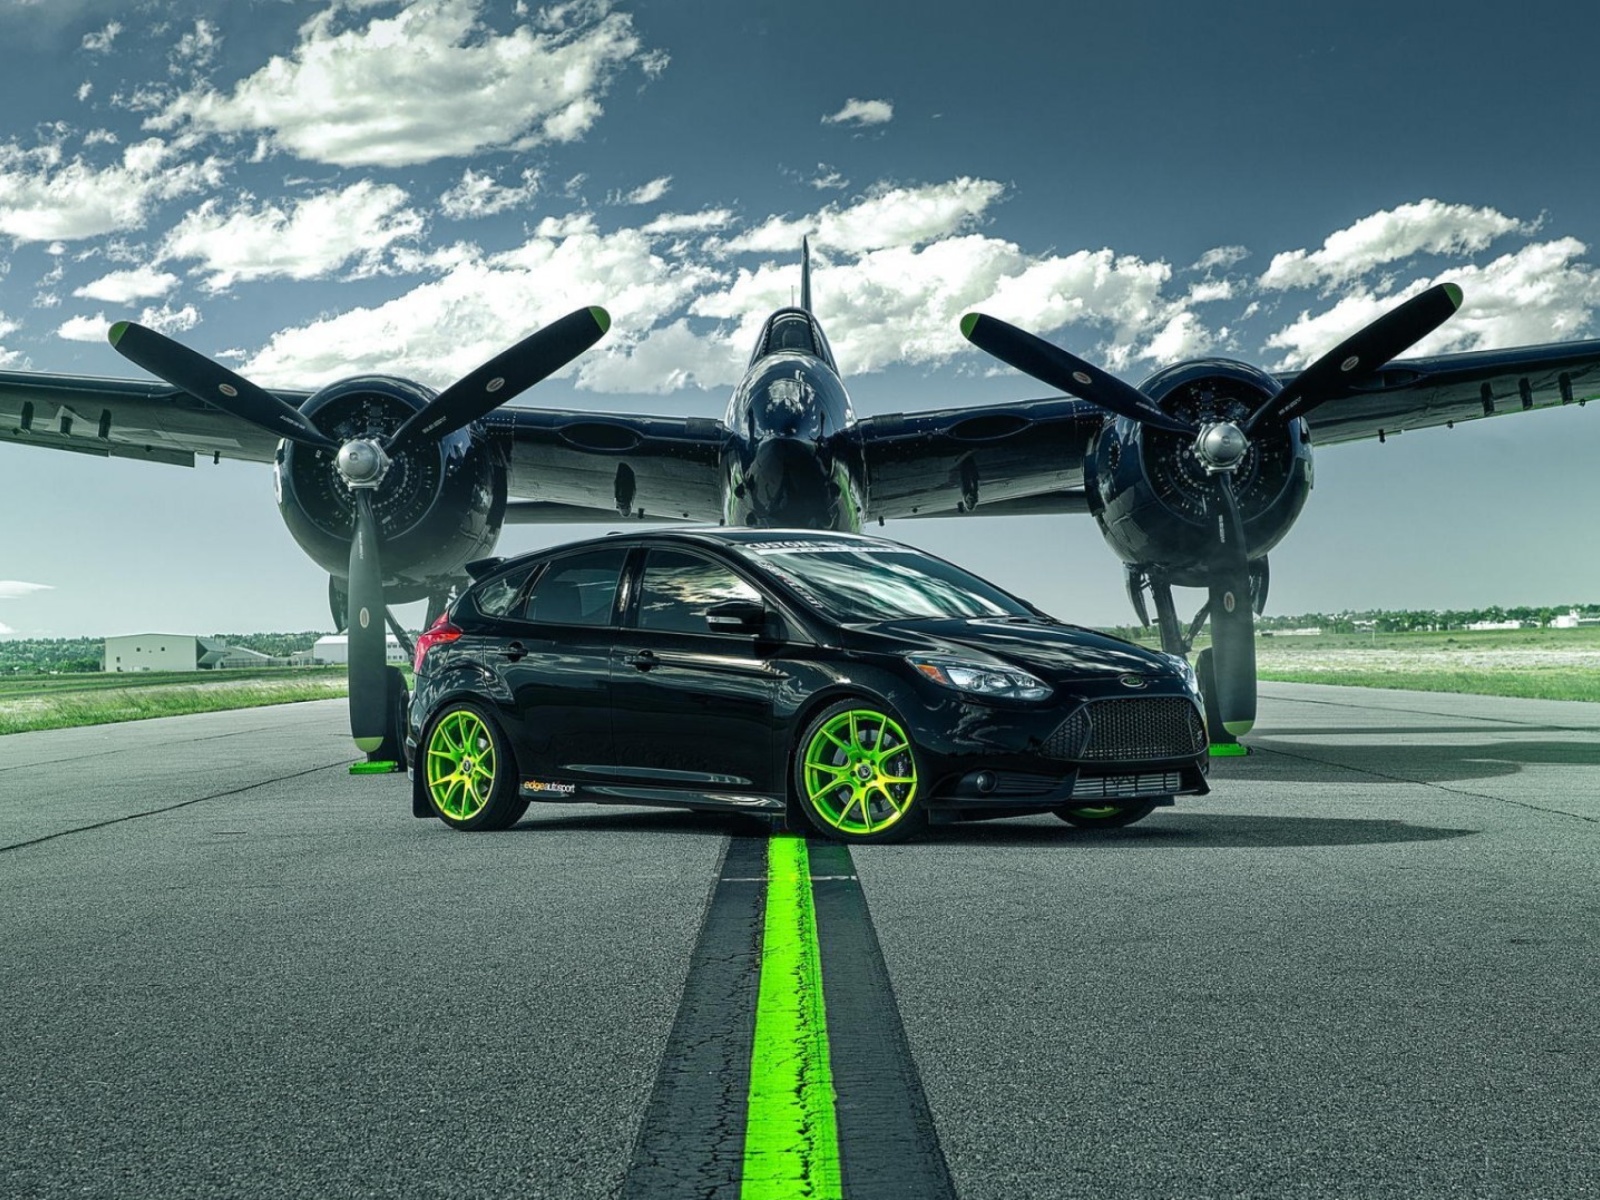 Das Ford Focus ST with Jet Wallpaper 1600x1200